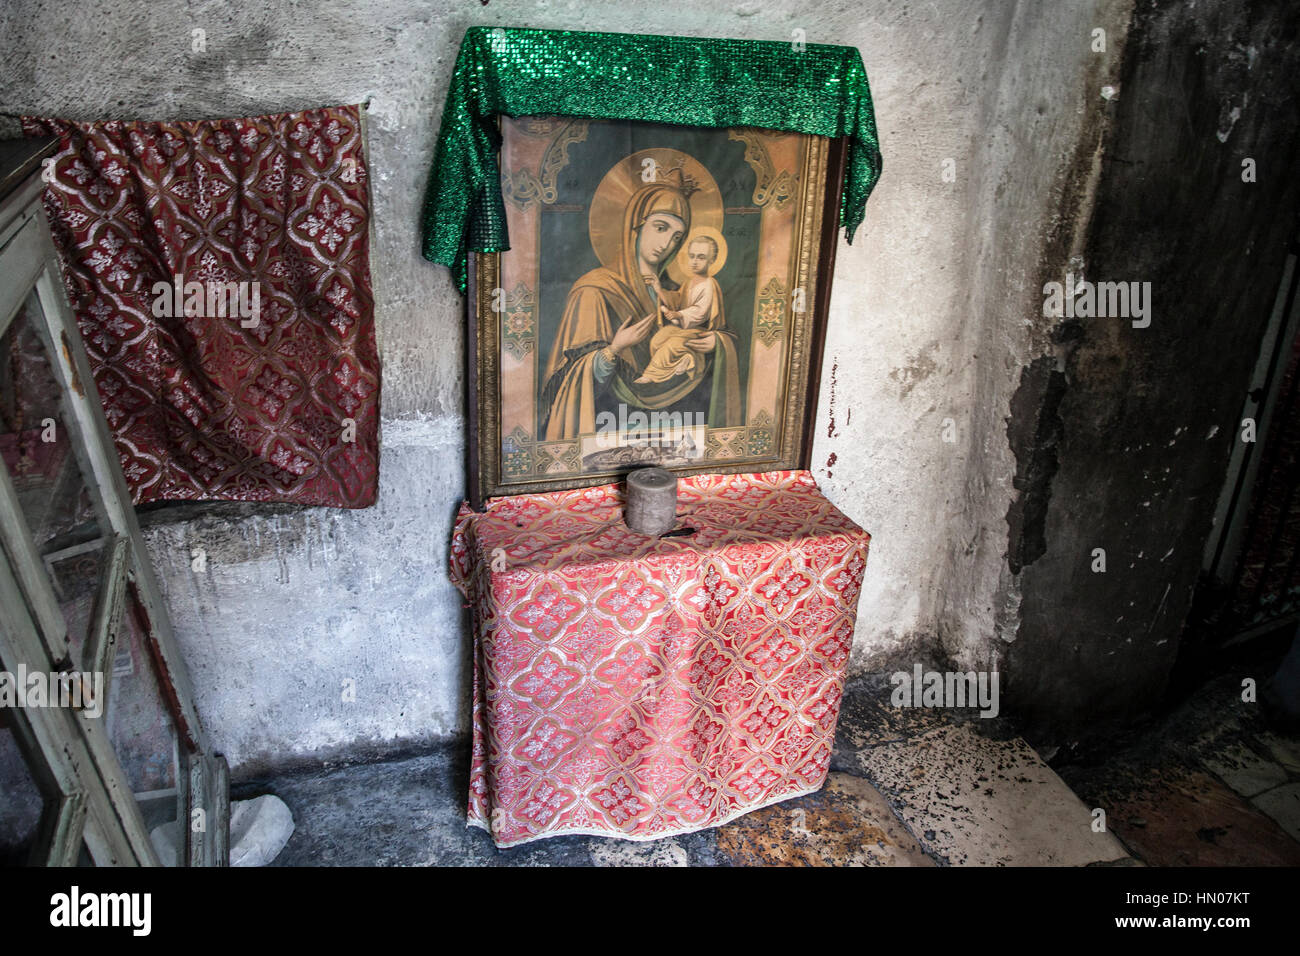 Jerusalem, Israel - October 27, 2013: Mary with the Child in an entrance to the Ethiopian chapel in the Church of the Holy Sepulchre in Jerusalem. Stock Photo